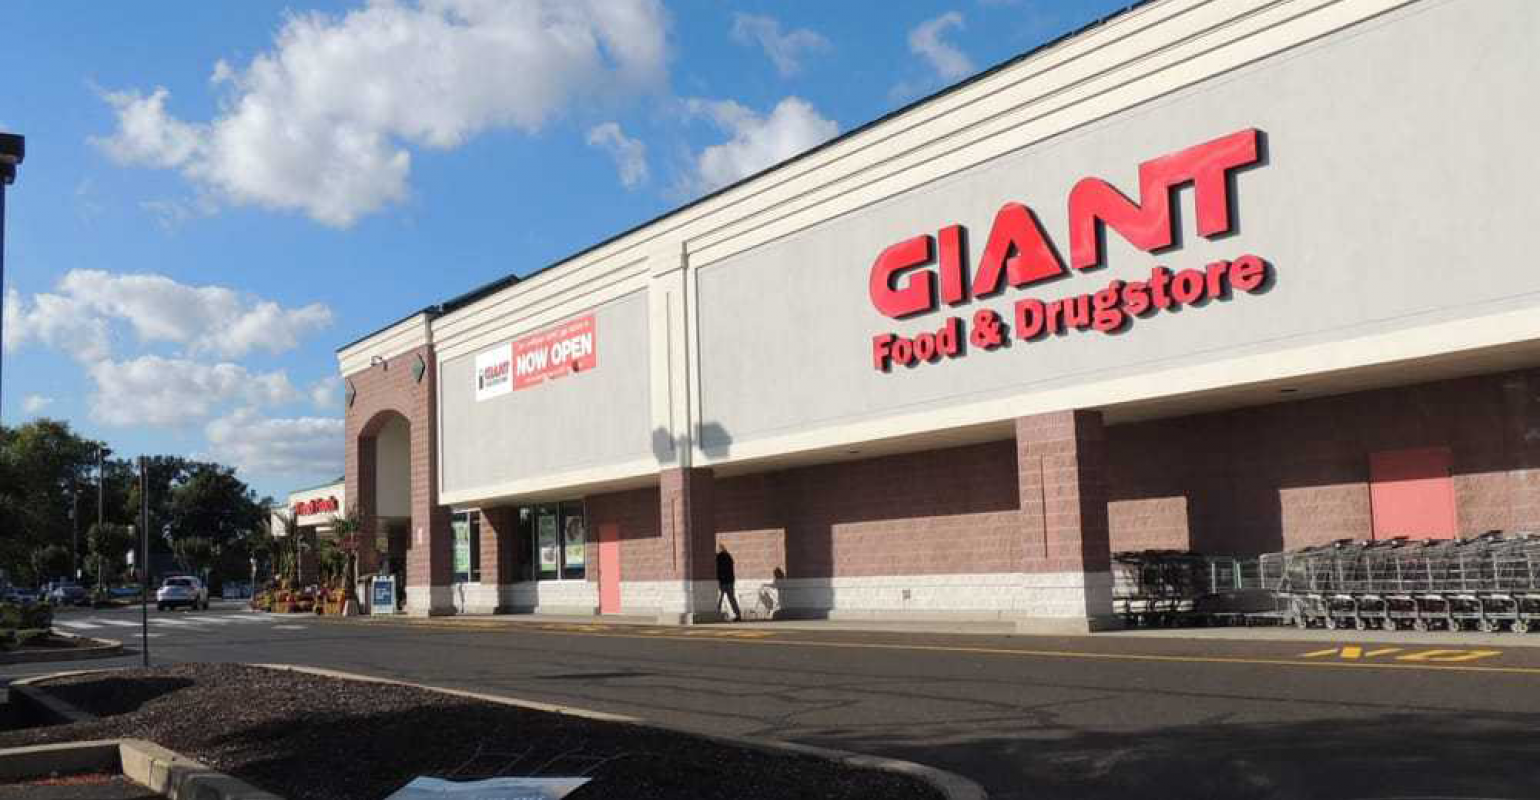 The exterior of a Giant Food grocery store.